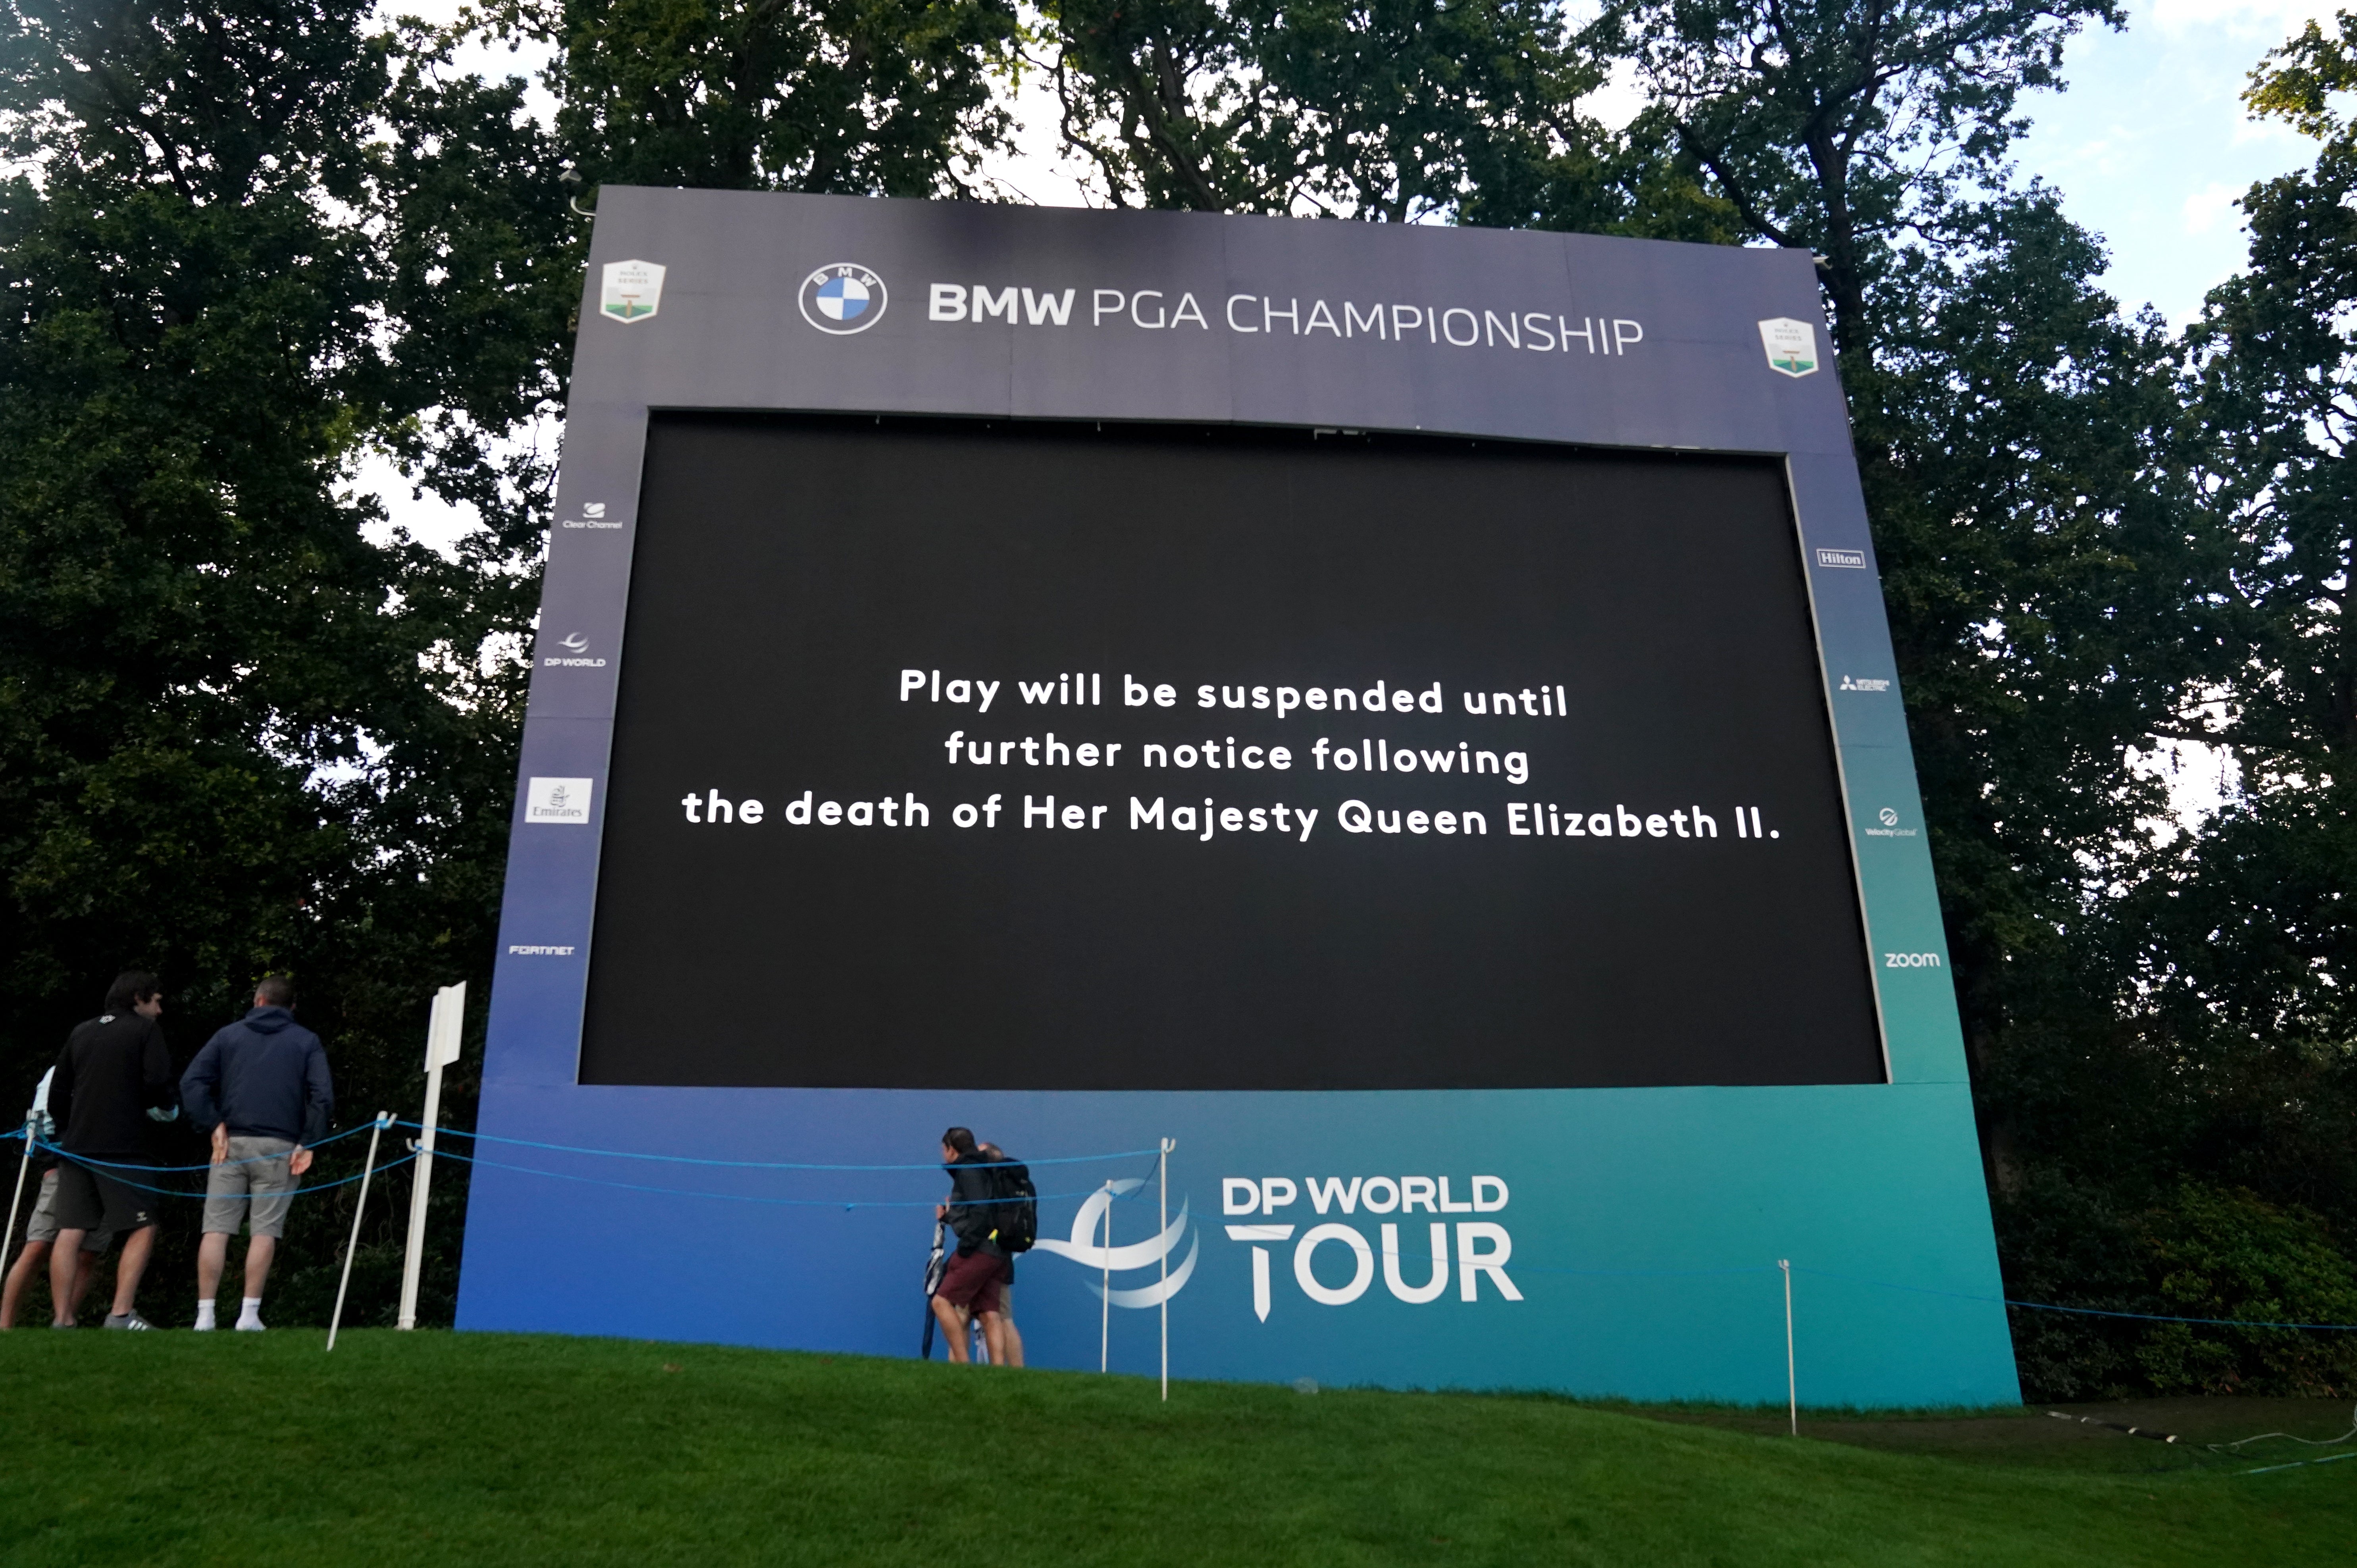 A screen displays a message that play in the BMW PGA Championship has been suspended following the death of Queen Elizabeth II (Adam Davy/PA)